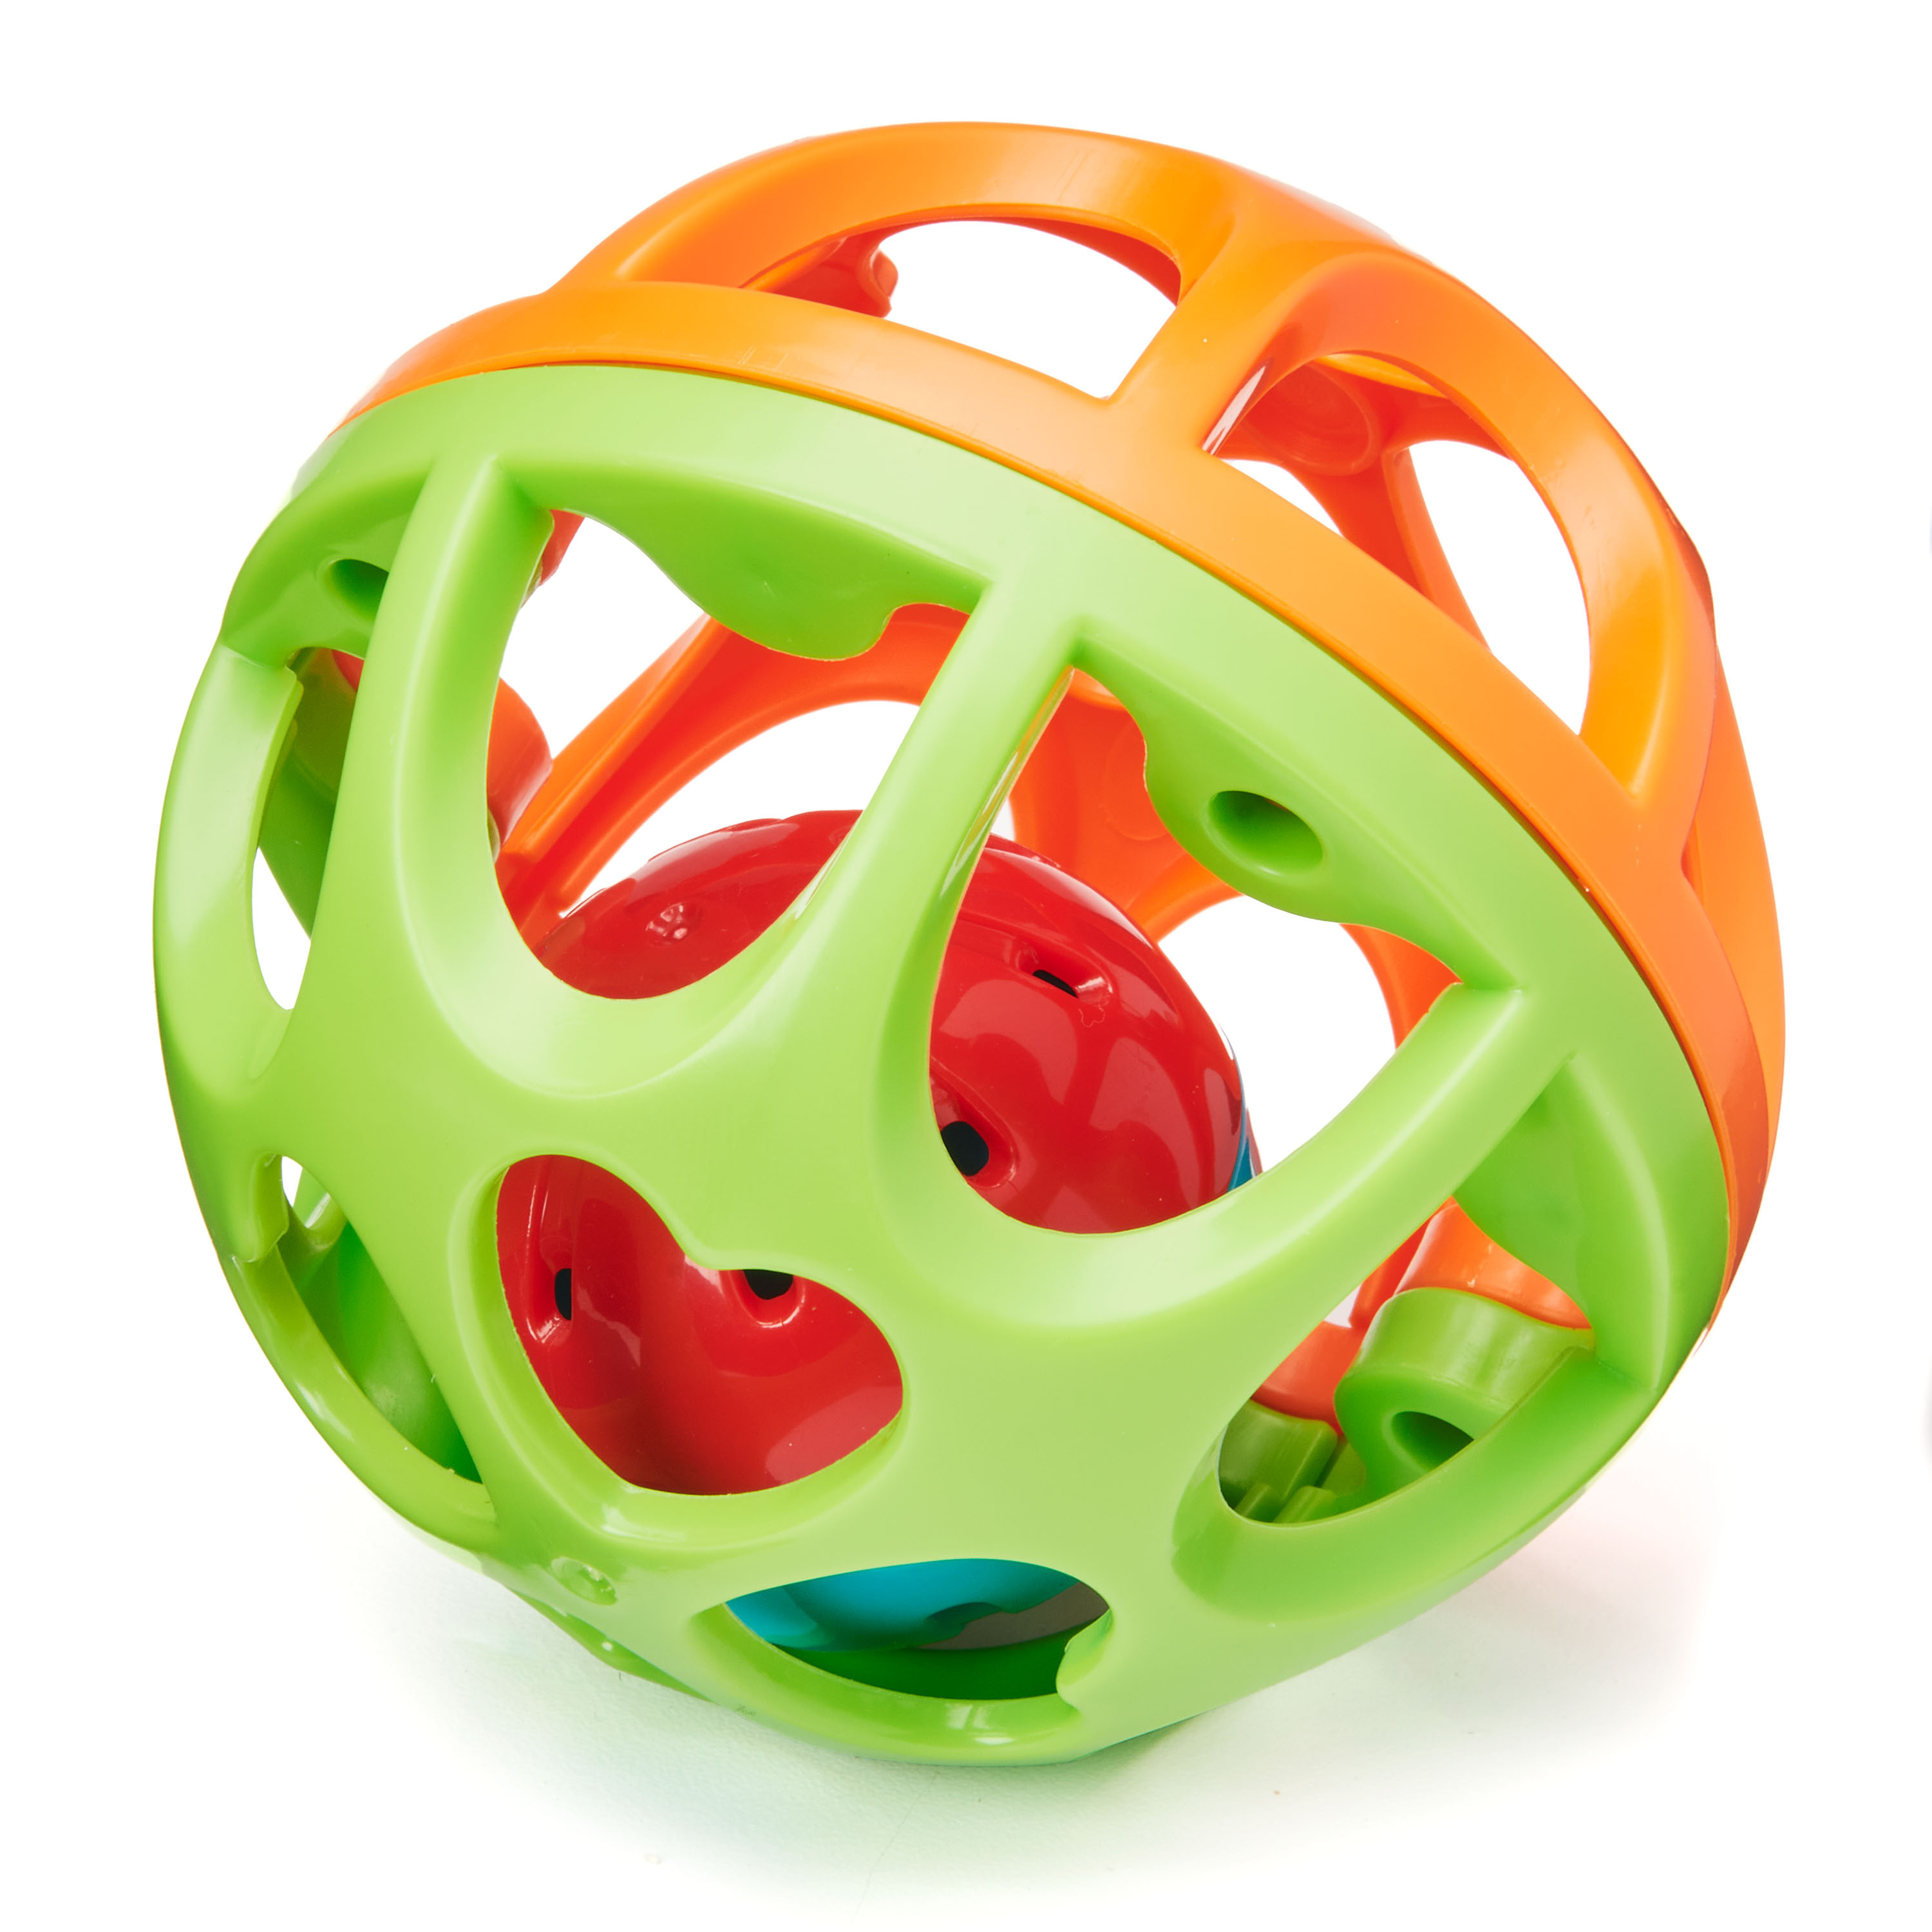 Spark. Create. Imagine. Sustainable Sensory Activity Play Ball, Assorted Colors - image 1 of 4